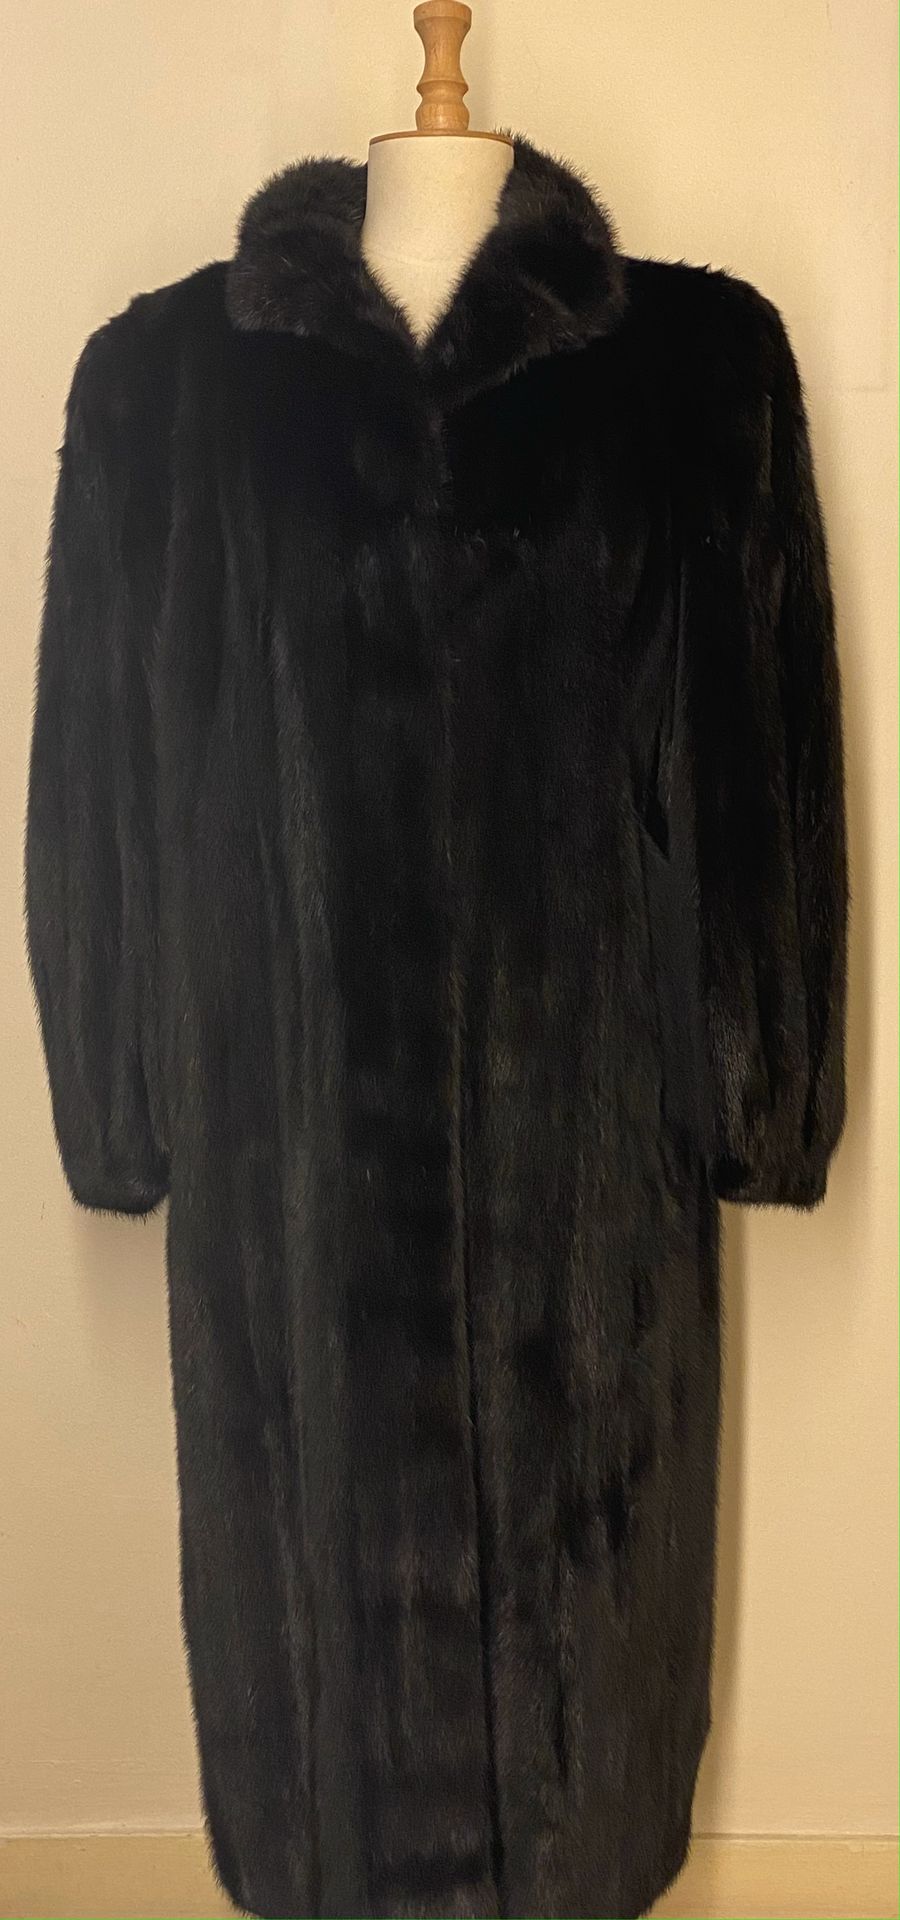 Null GIL Fourrures in NANCY

Long dark mink coat - Size 38/40 



The withdrawal&hellip;